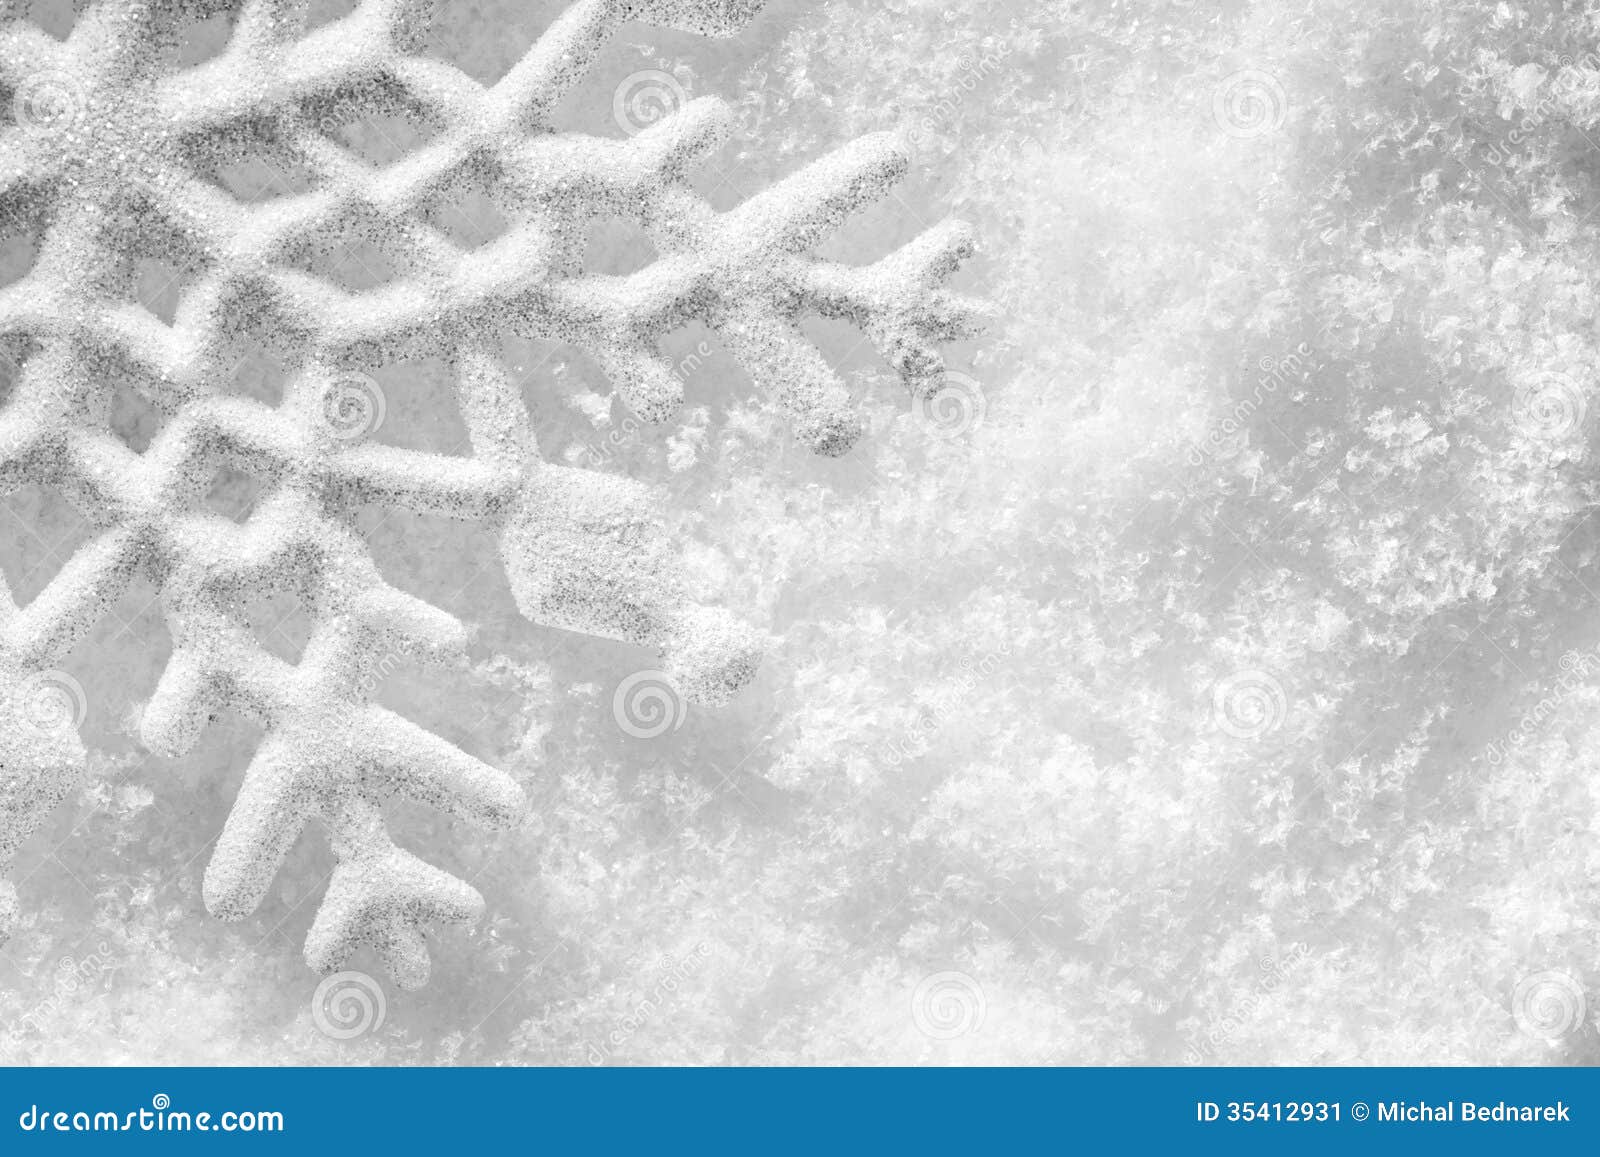 327,187 Background Snowflake Stock Photos - Free & Royalty-Free Stock  Photos from Dreamstime